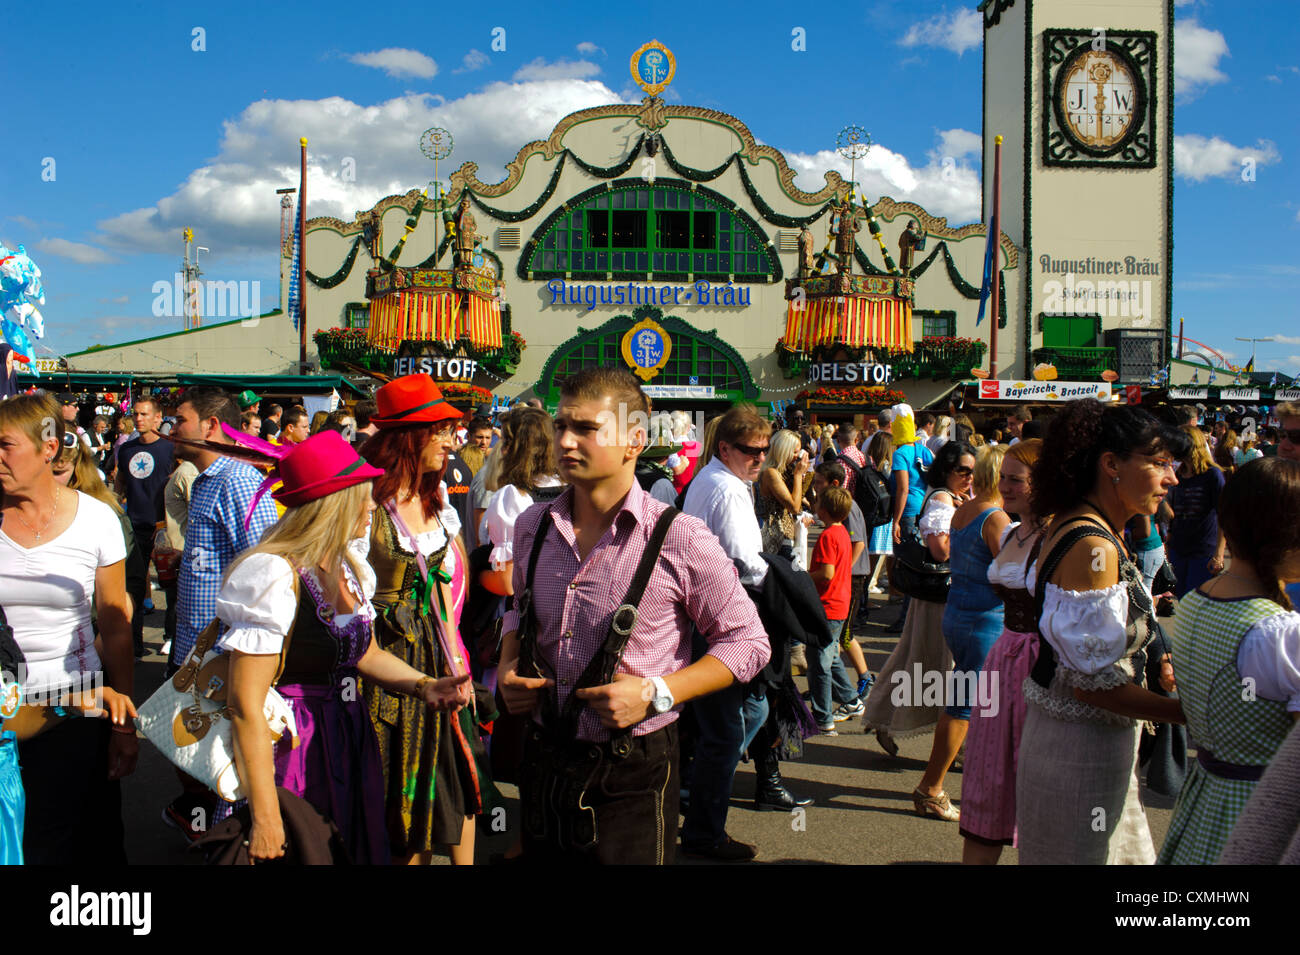 Panorama View To Street Scene And Beer Tent At World Biggest Beer Festival Oktoberfest In